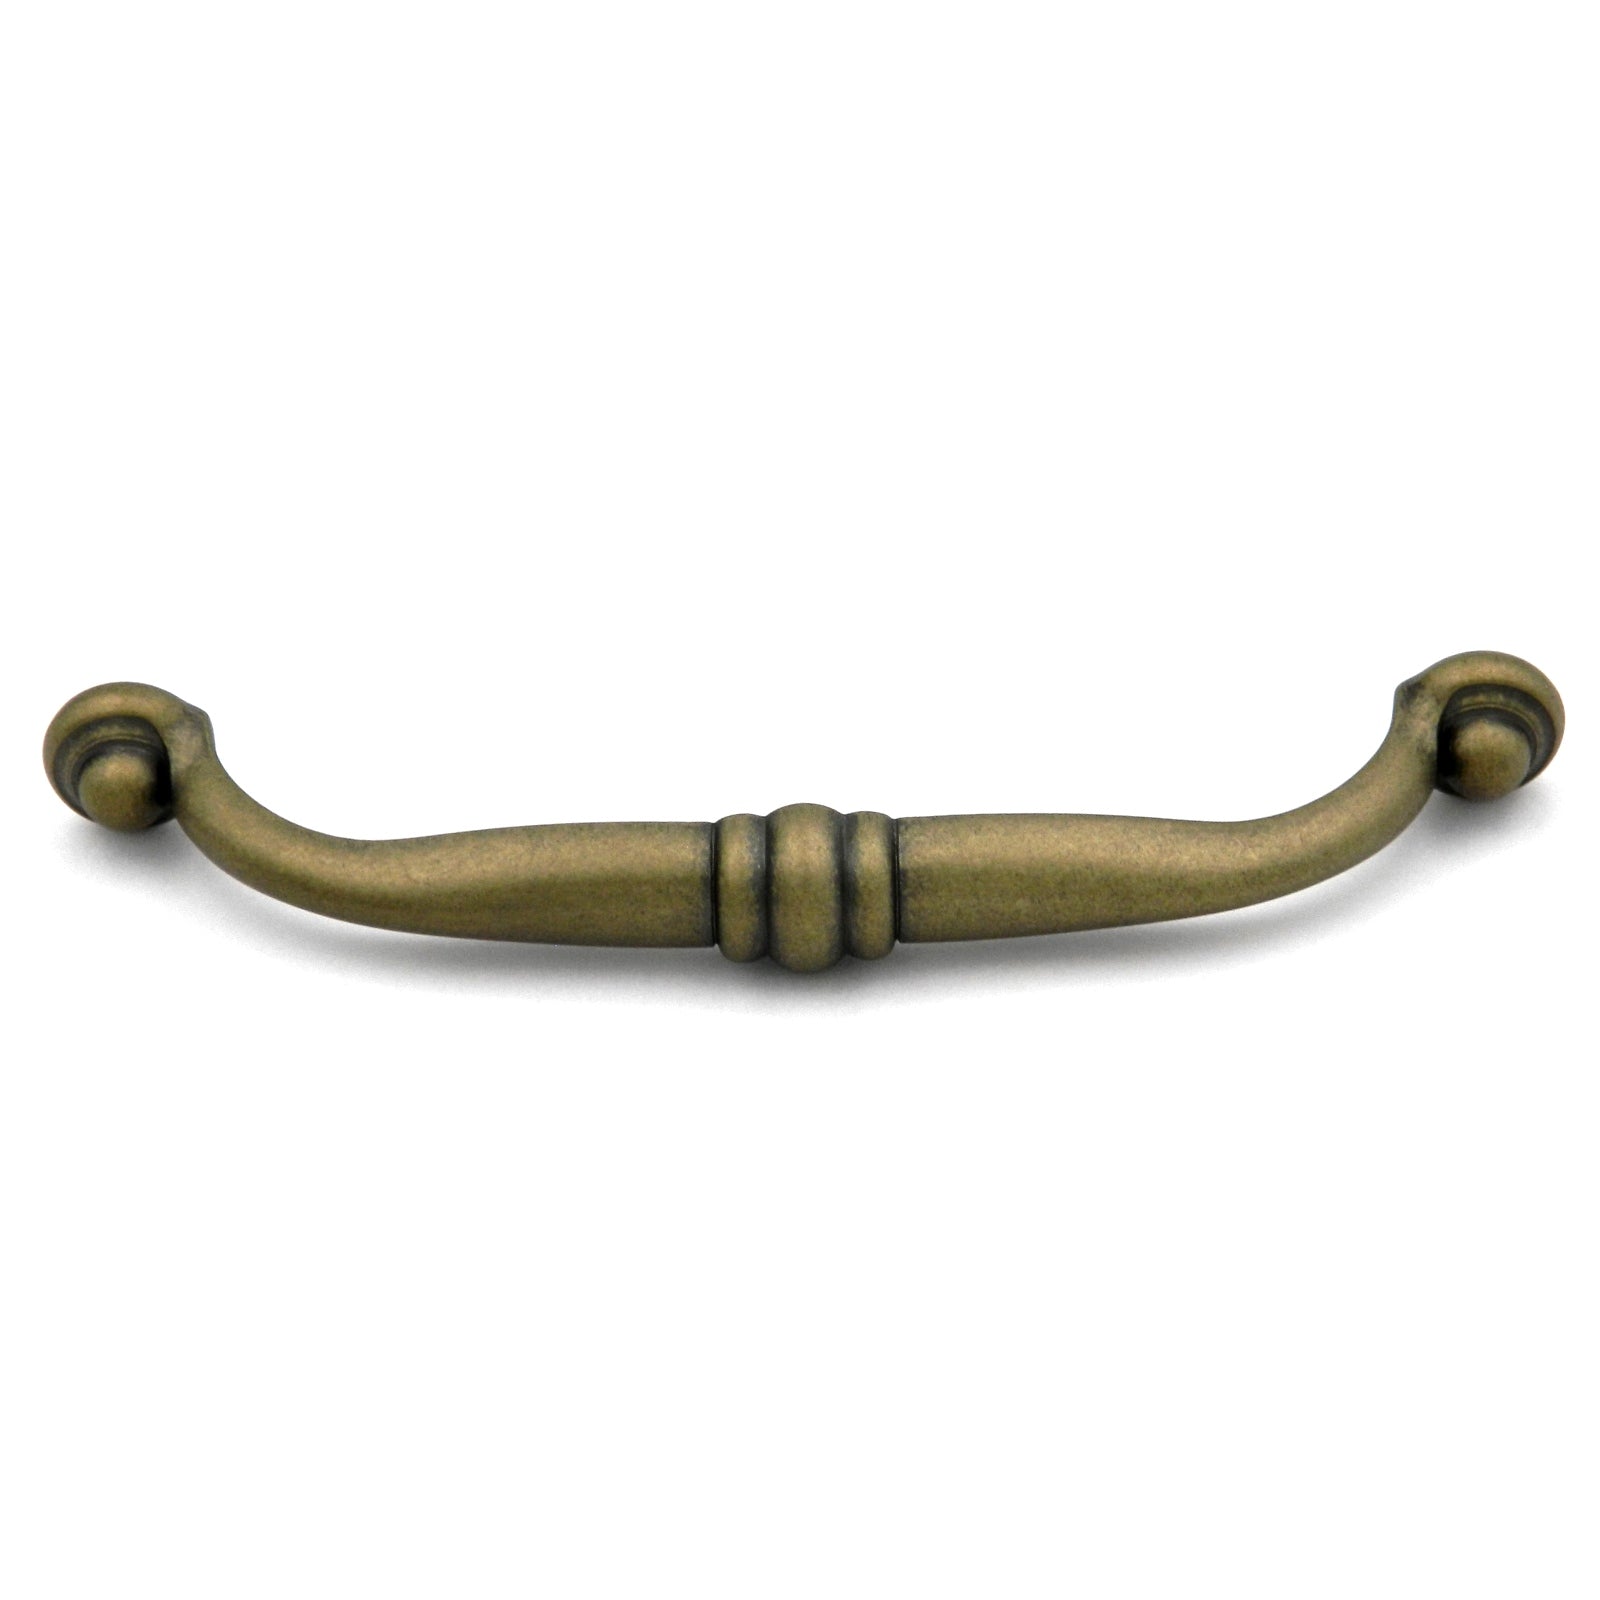 Belwith Keeler Antique Brass 5"cc (128mm) Arch Cabinet Handle Pull 55050-9017